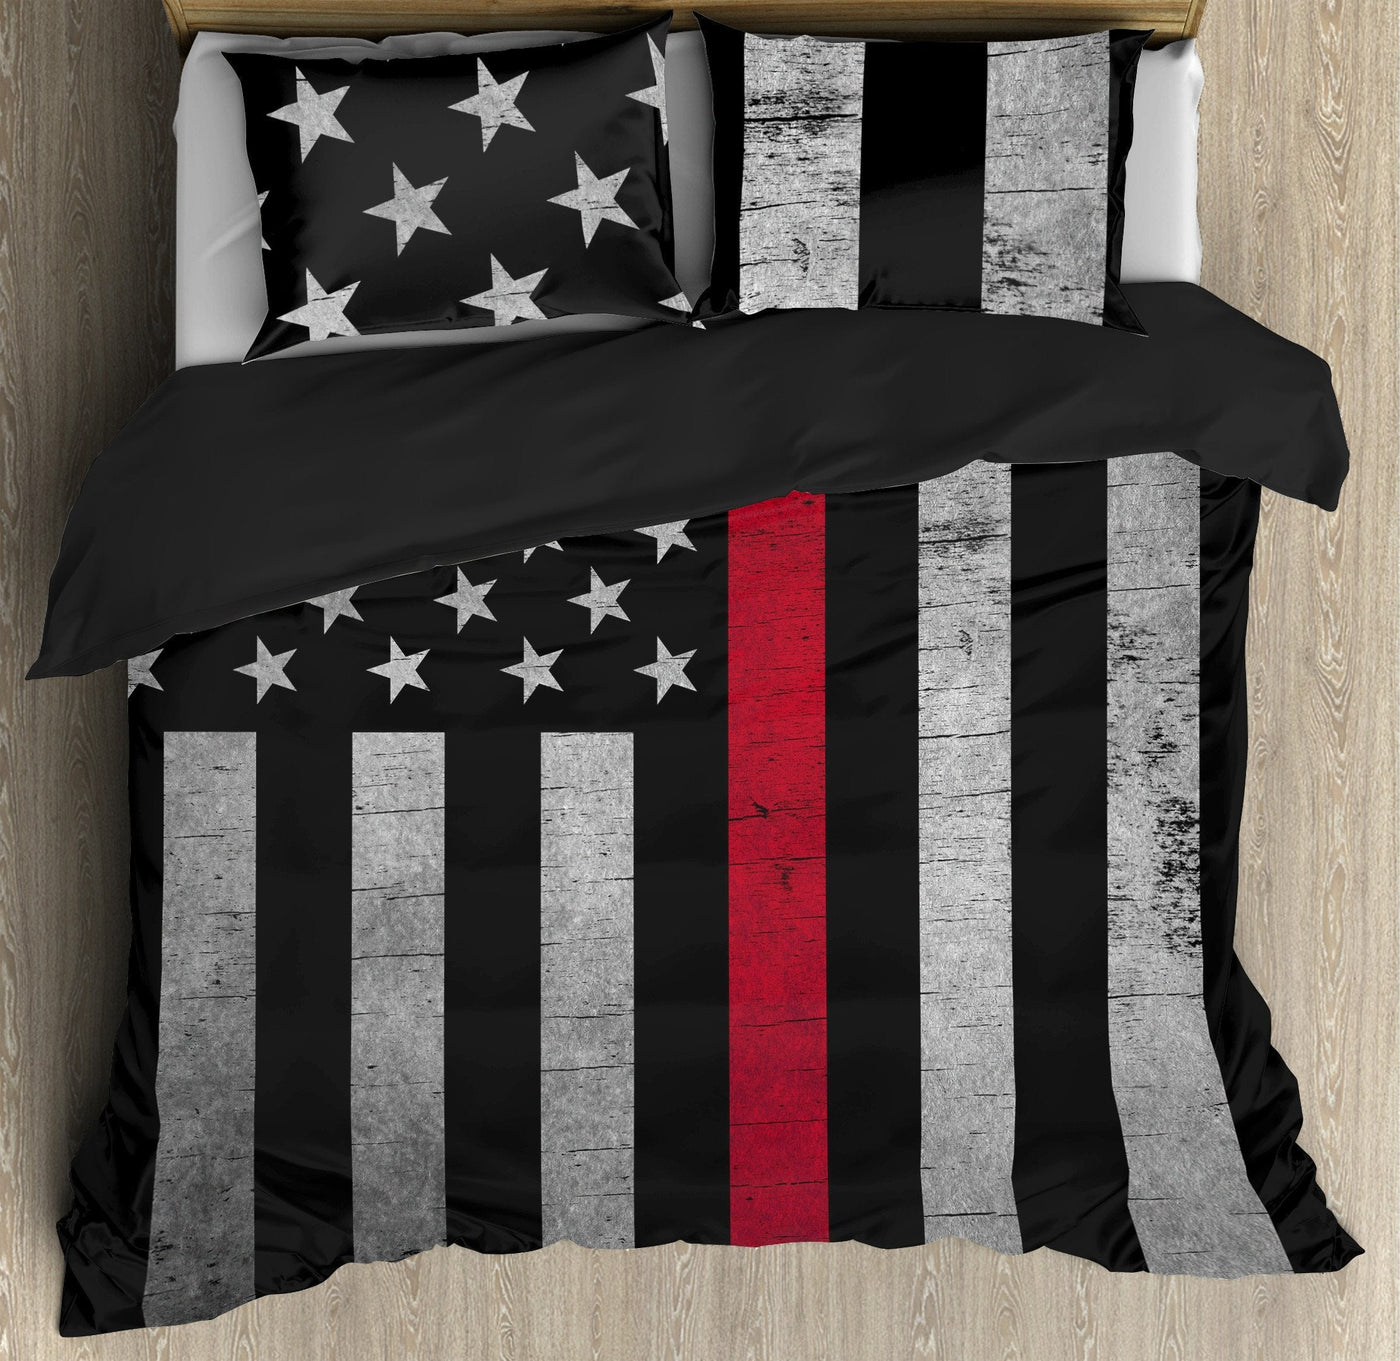 Firefighter Be Strong The Red Line Firefighter - Bedding Cover - Owls Matrix LTD